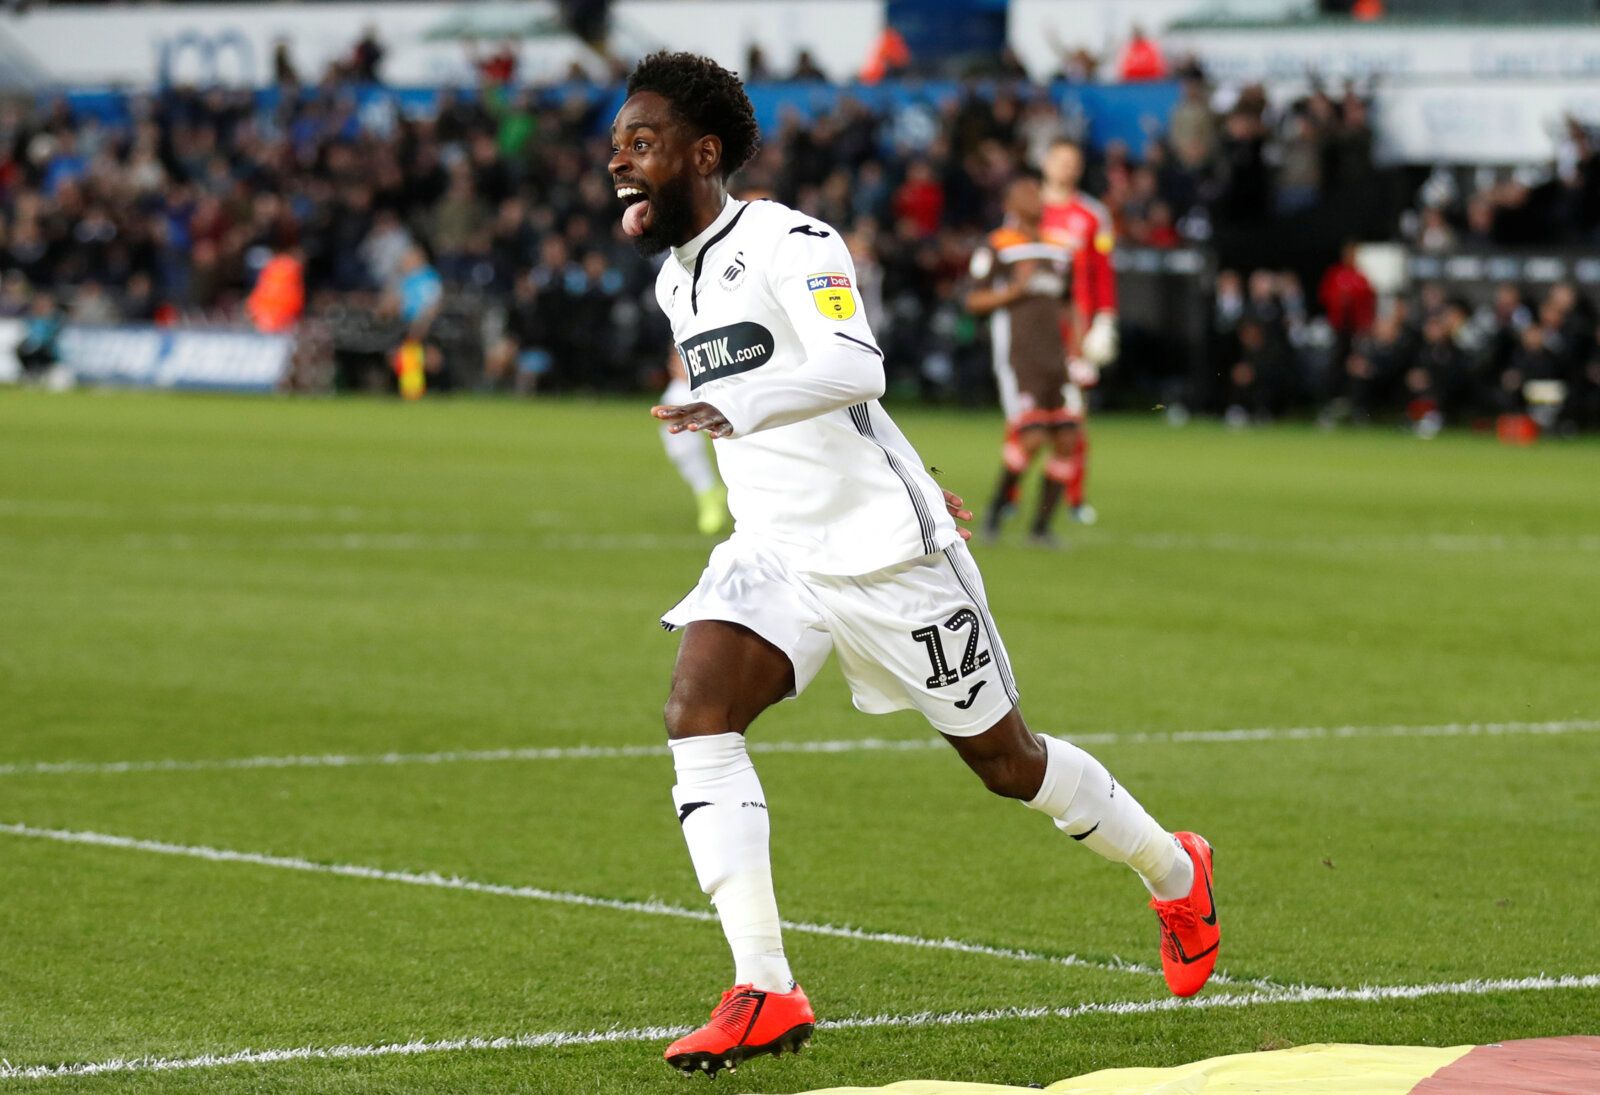 Soccer Football - Championship - Swansea City v Brentford - Liberty Stadium, Swansea, Britain - April 2, 2019   Nathan Dyer of Swansea City celebrates scoring their first goal   Action Images/Matthew Childs    EDITORIAL USE ONLY. No use with unauthorized audio, video, data, fixture lists, club/league logos or 